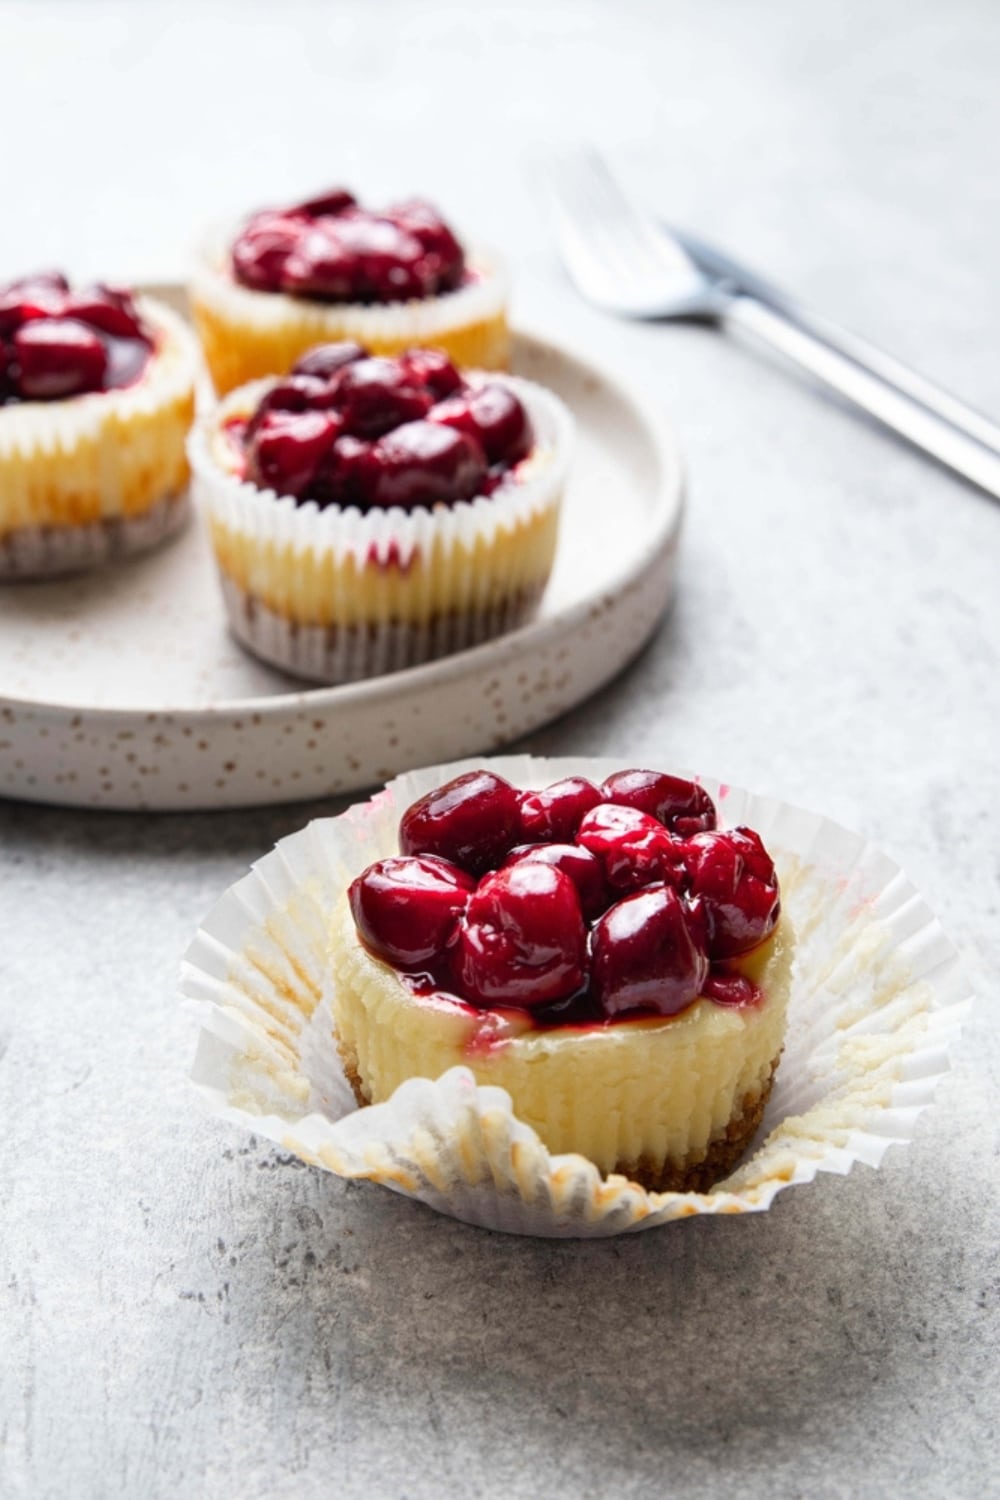 3 Mini Cheesecakes Topped With Cherries on a Plate in the Background and 1 Mini Cheesecake With Cherries in Foreground with Open Wrapper